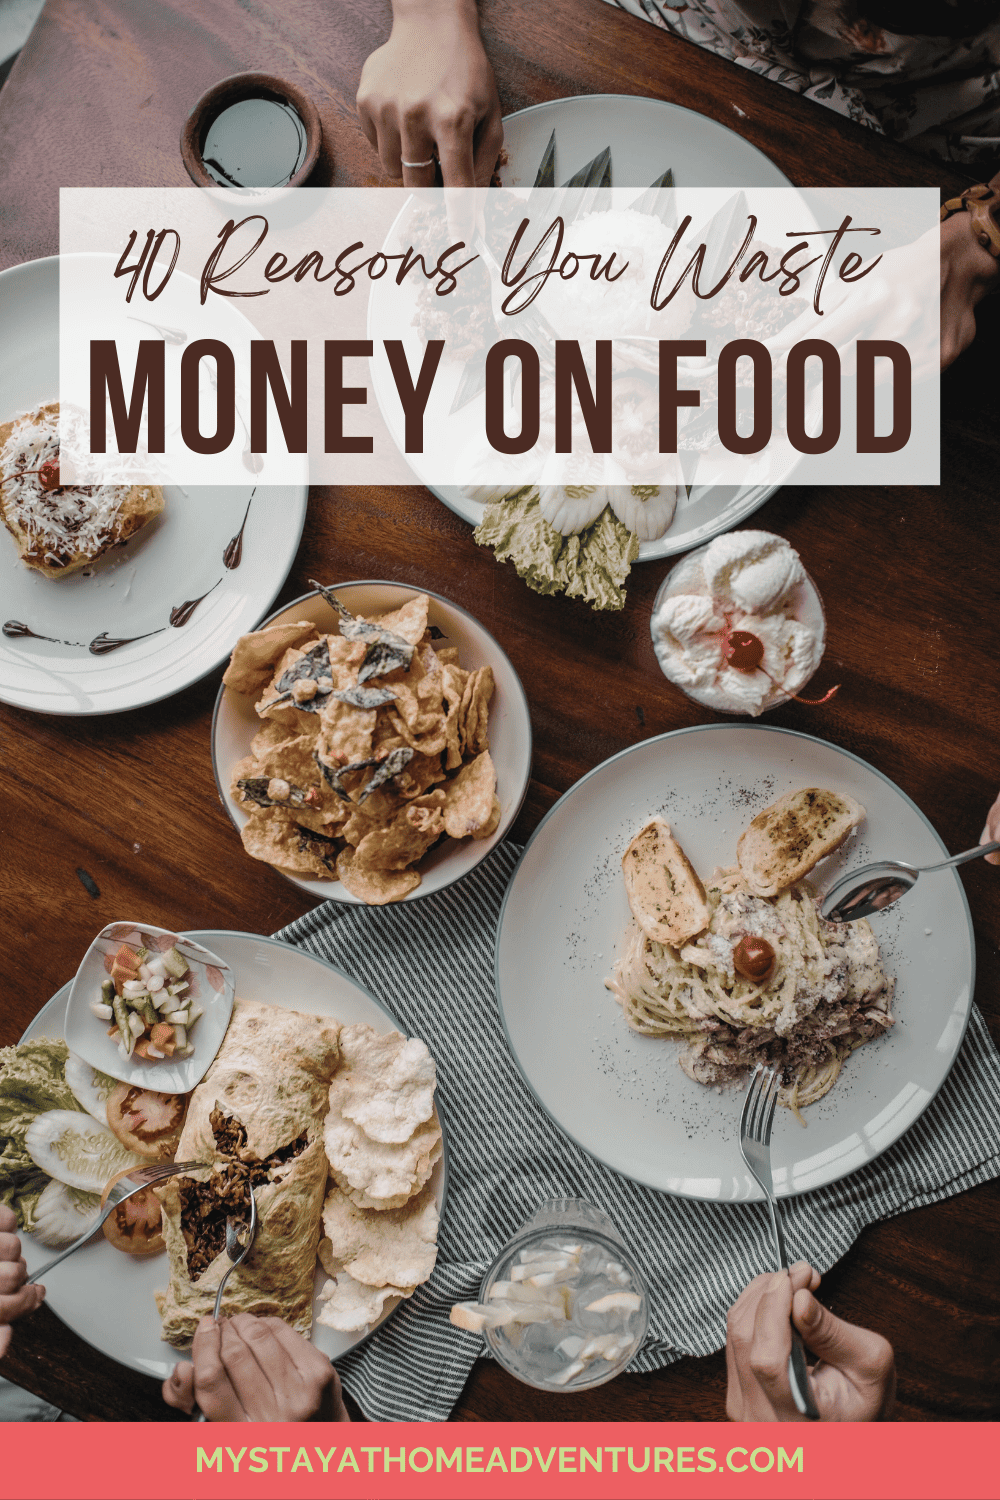 Stop throwing money down the drain! Discover 40 reasons people waste money on food, and learn how to put an end to it. Take control of your spending and start saving money today - click now! via @mystayathome